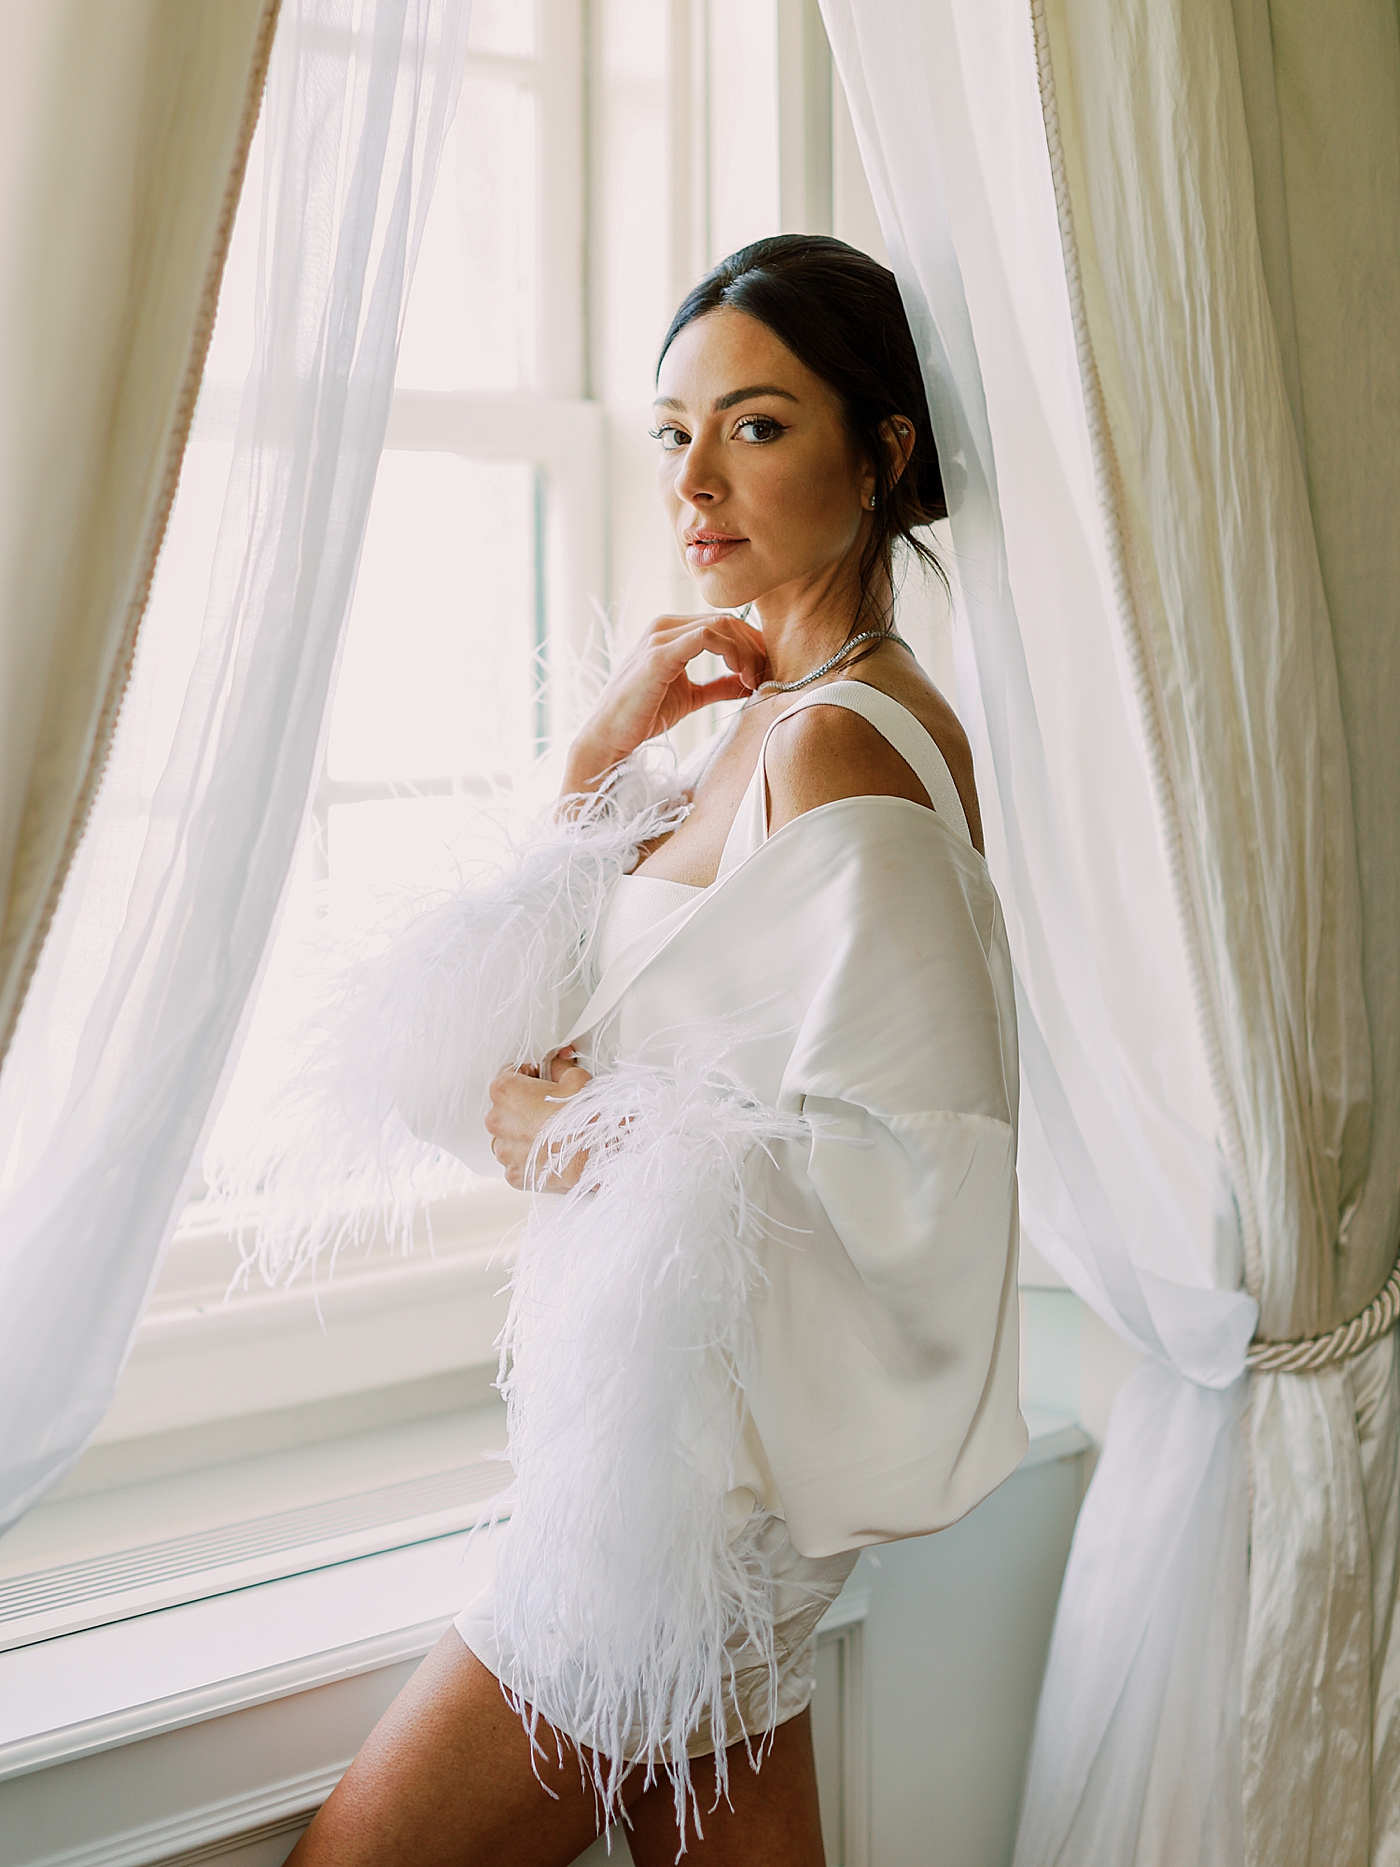 Bride in a robe looking out the window | Image by Diane Sotero Photography